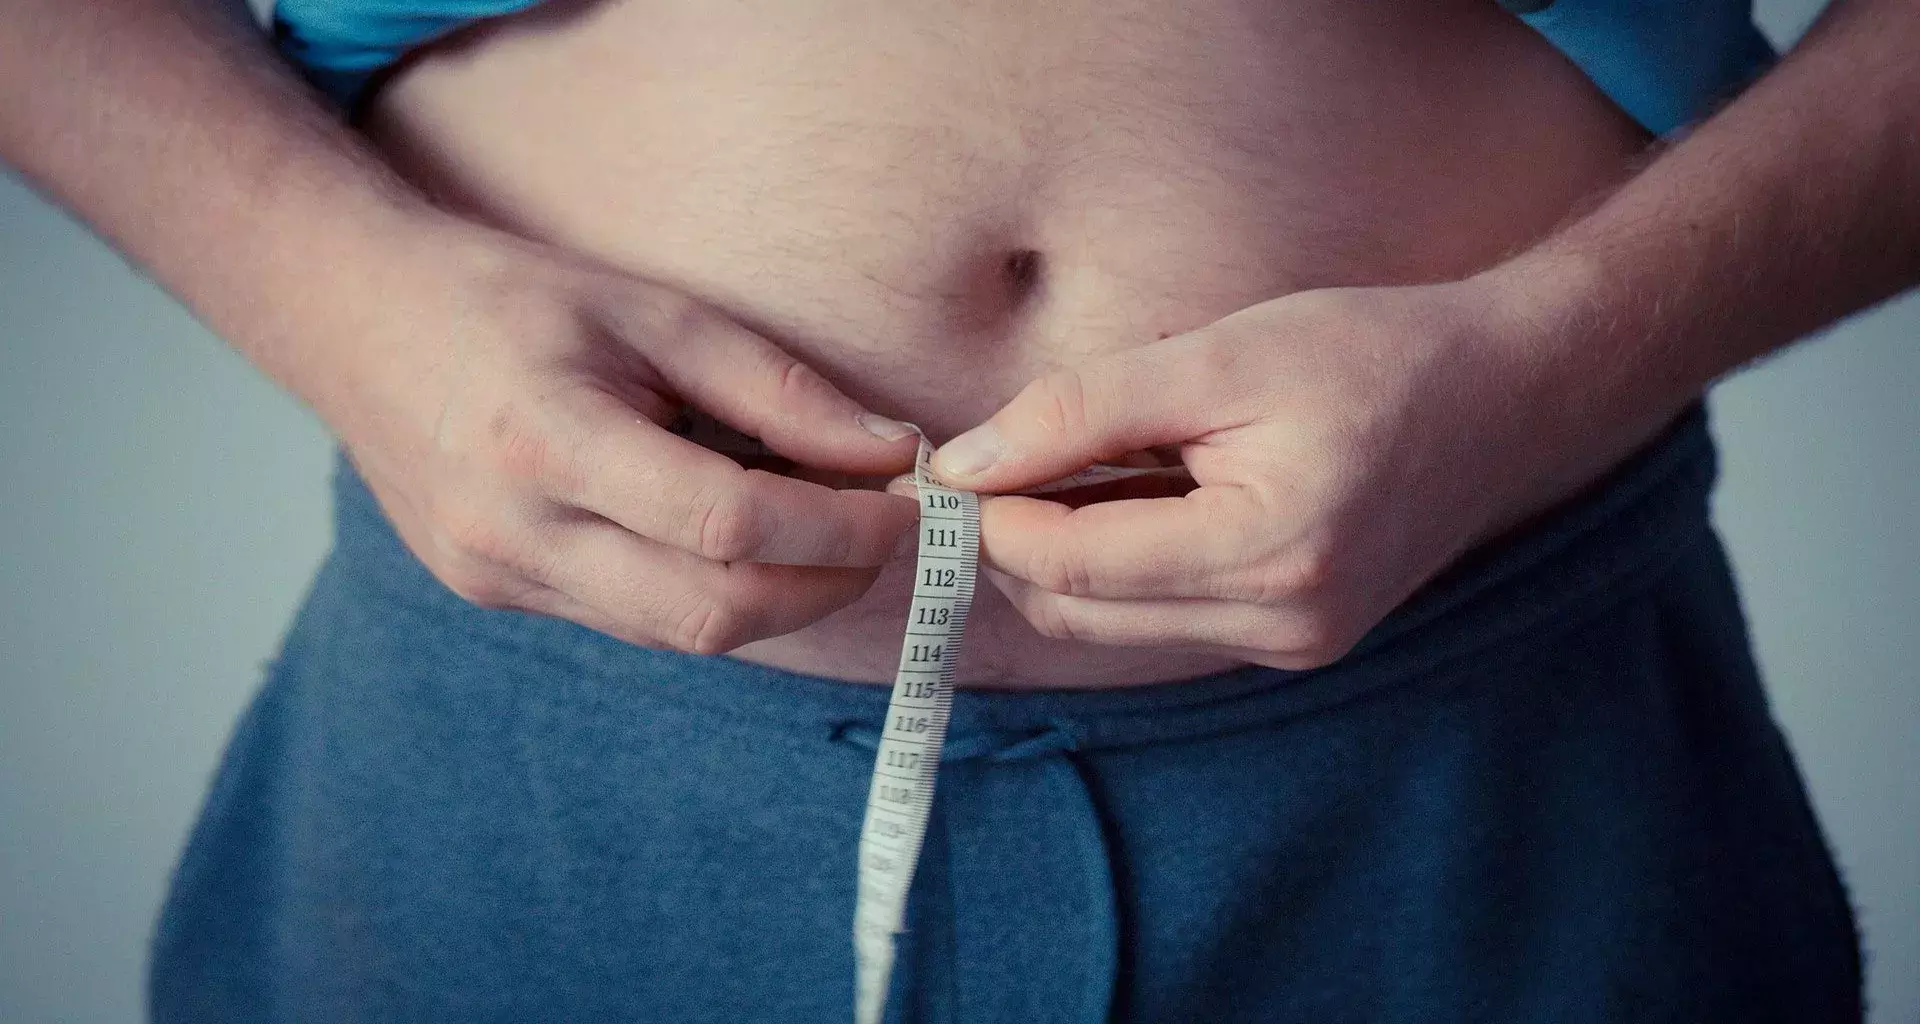 Why are people with obesity vulnerable to COVID-19?